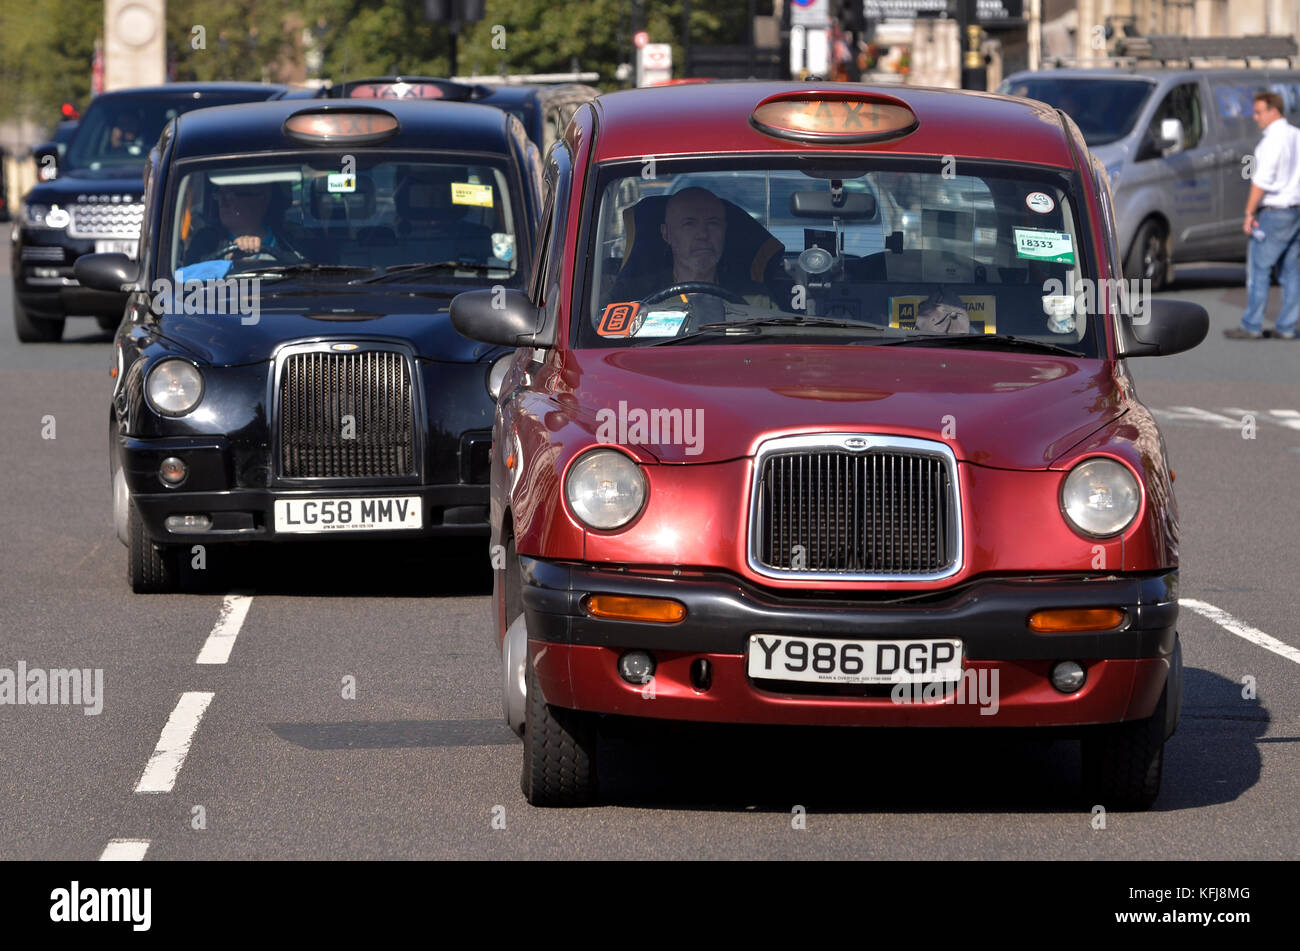 London taxi cabs in traffic, Westminster, London. Both are TX4 taxi cabs manufactured by The London Taxi Company, formerly LTI Vehicles. Stock Photo